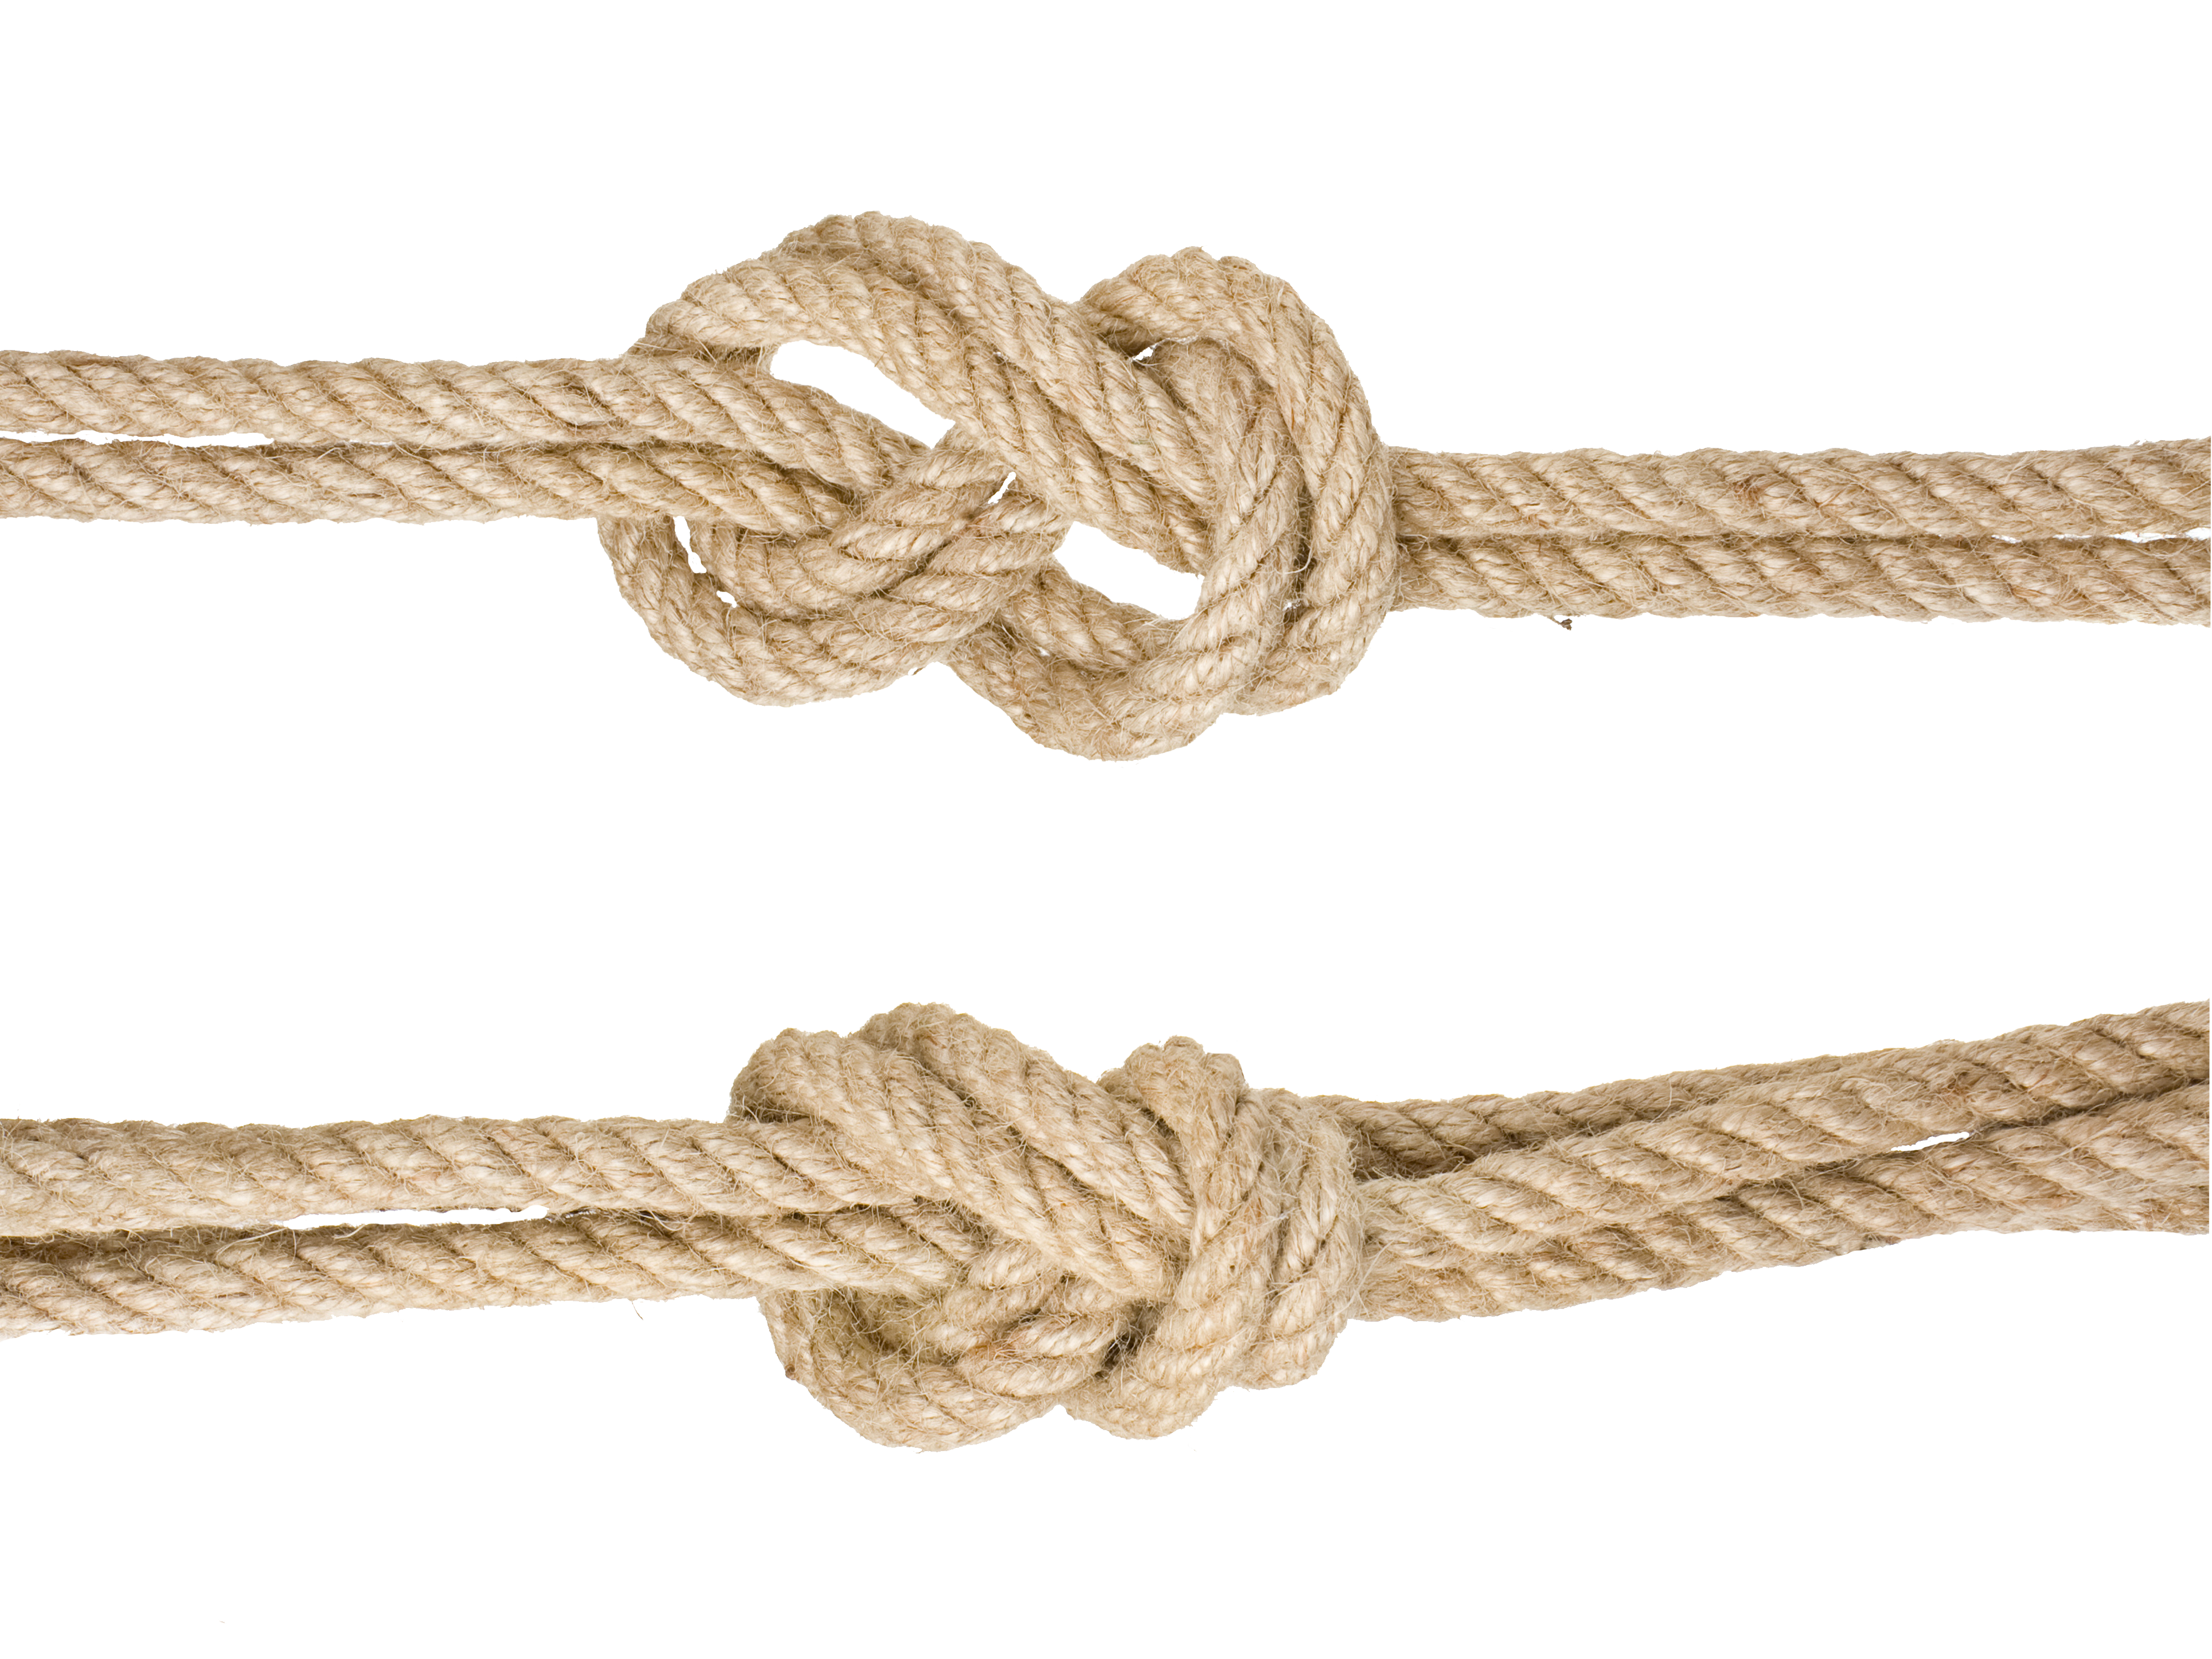 Google Knotted Rope Knot Images Hemp PNG Image